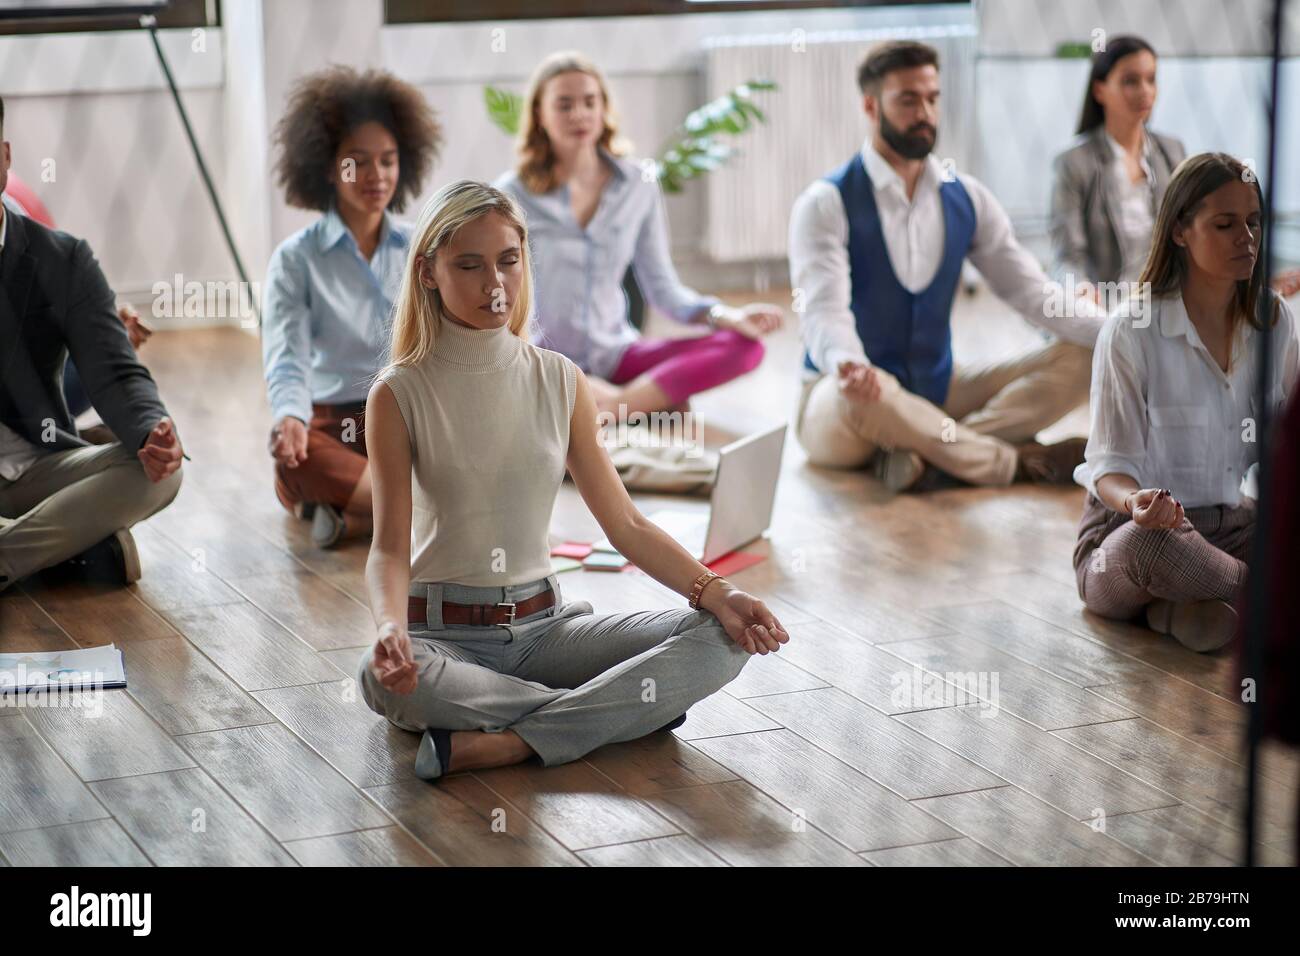 Modern woman meditating at work.coworkers meditating together at work. Stock Photo